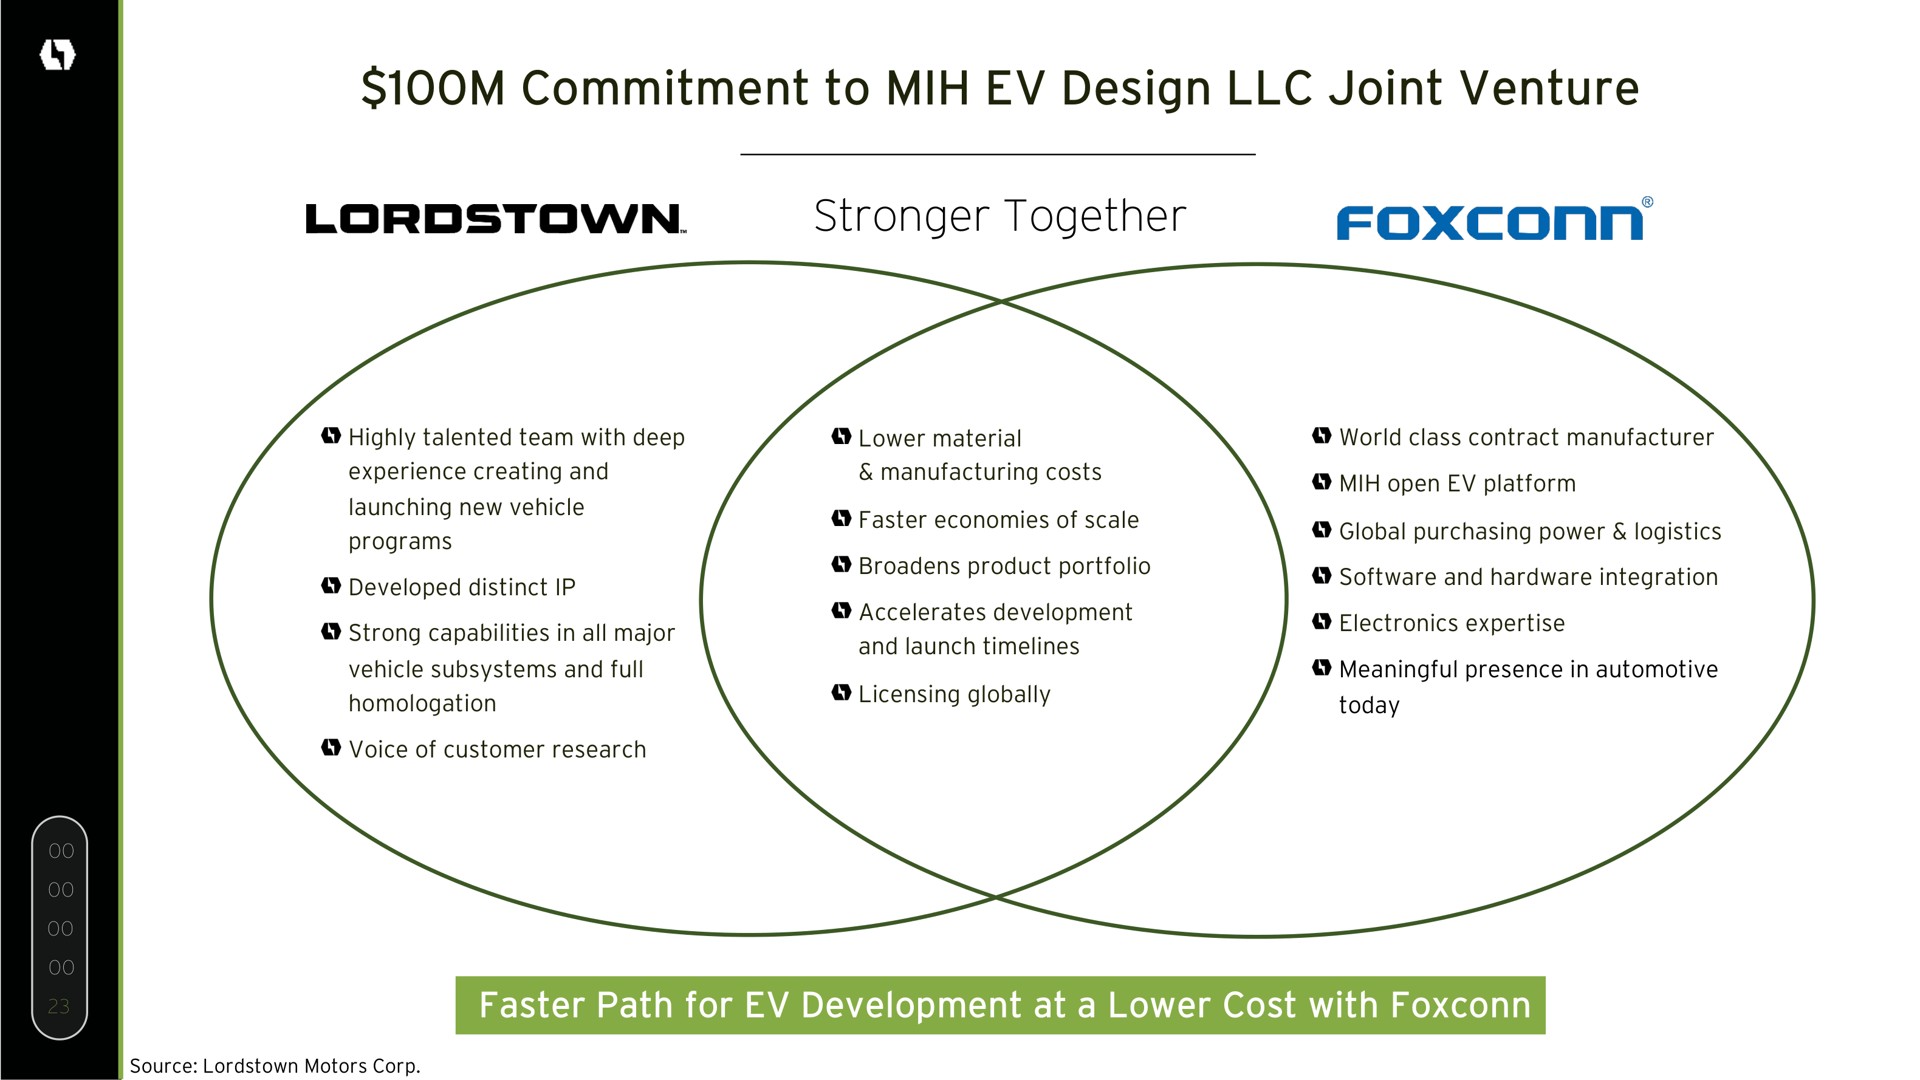 commitment to design joint venture together | Lordstown Motors